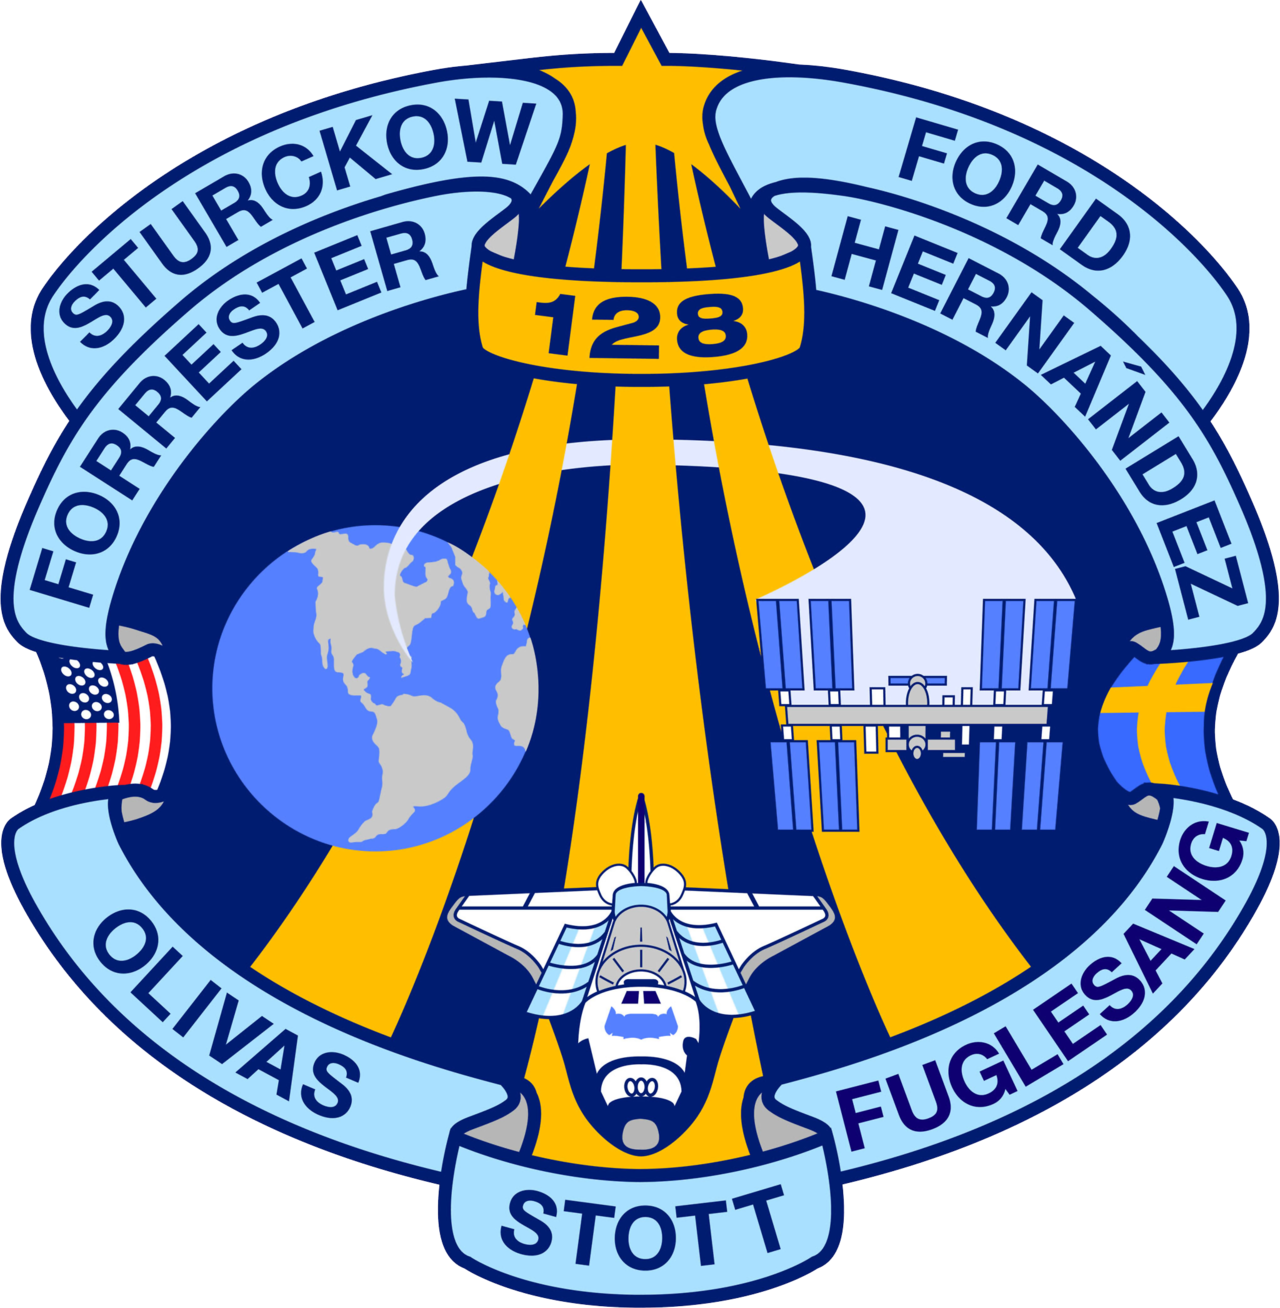 Mission patch for STS-128